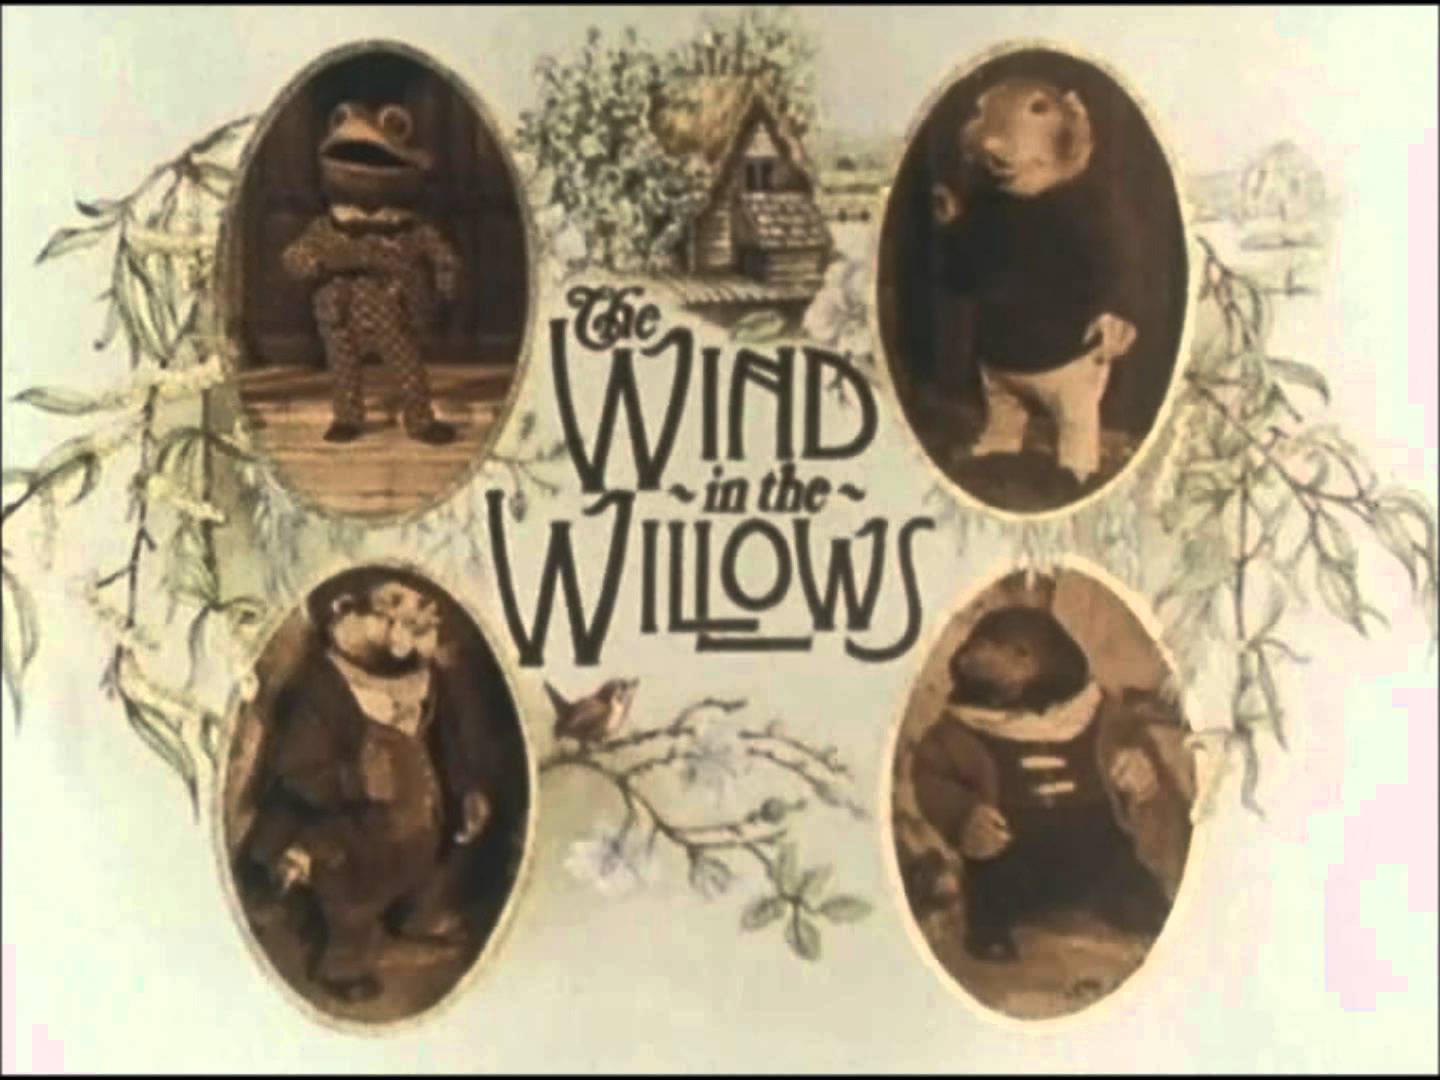 the wind in the willows book